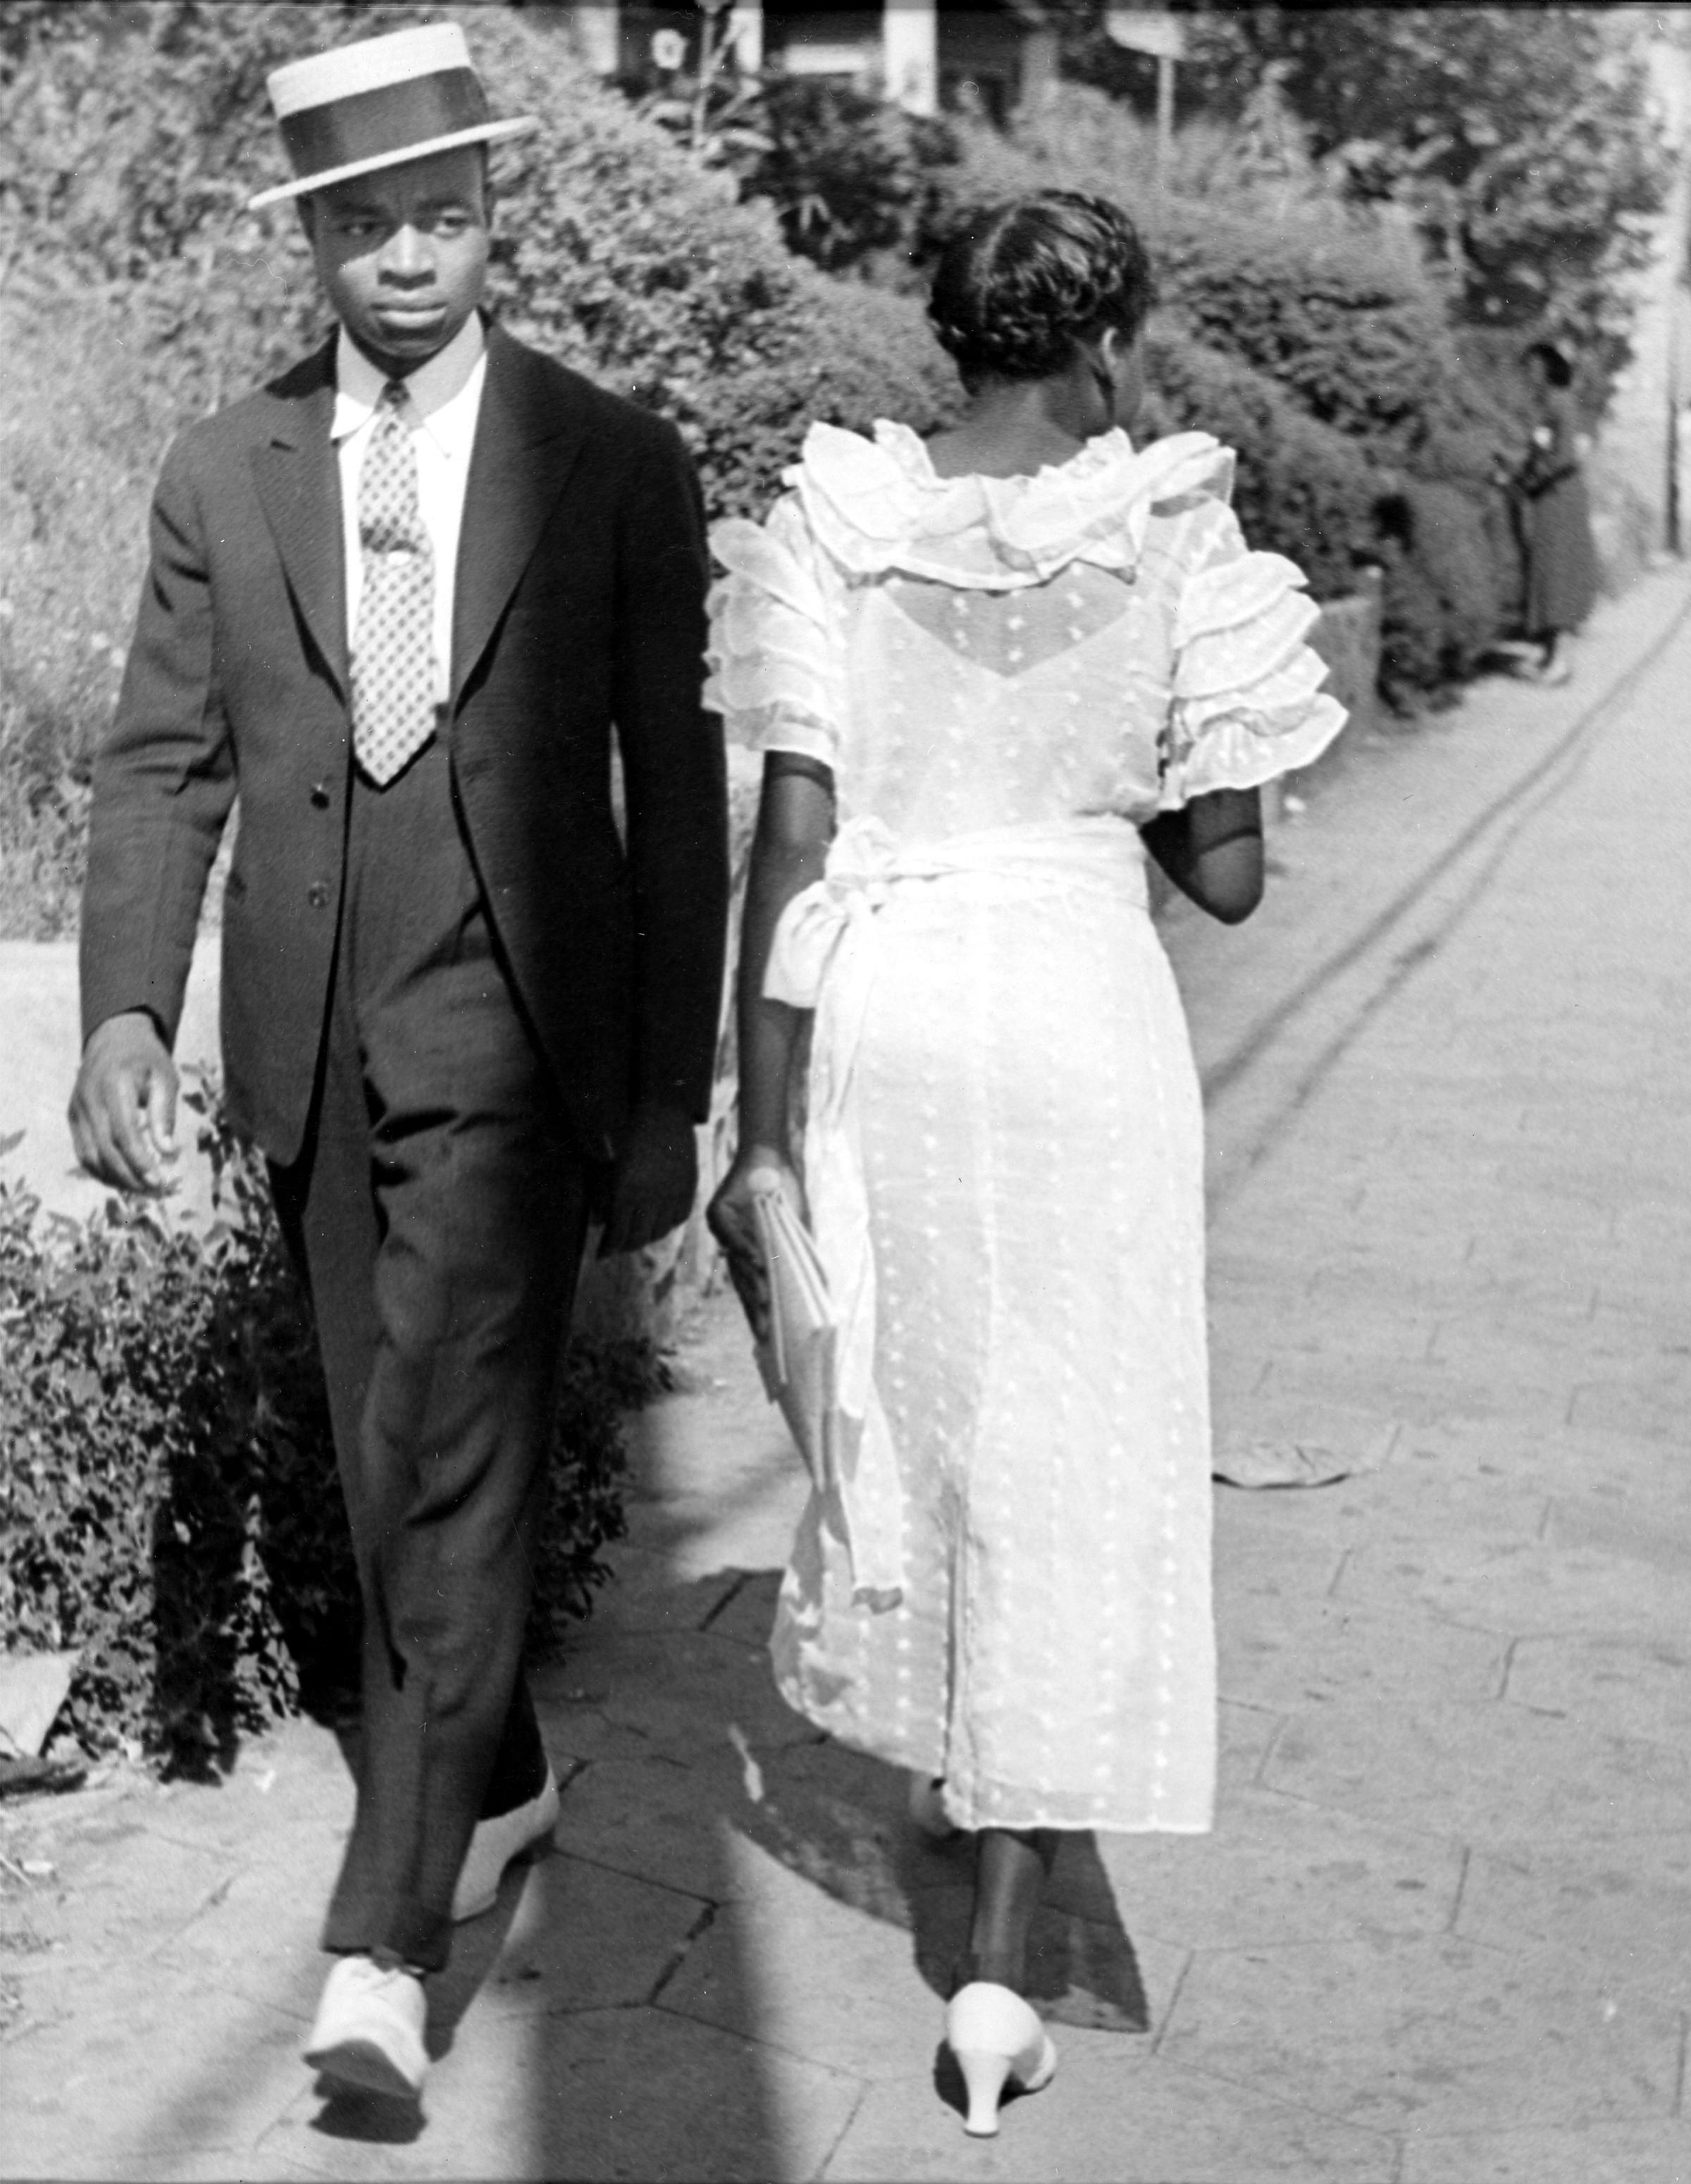 A young man and woman in Sunday finery pass on the street, Mississippi, 1936.